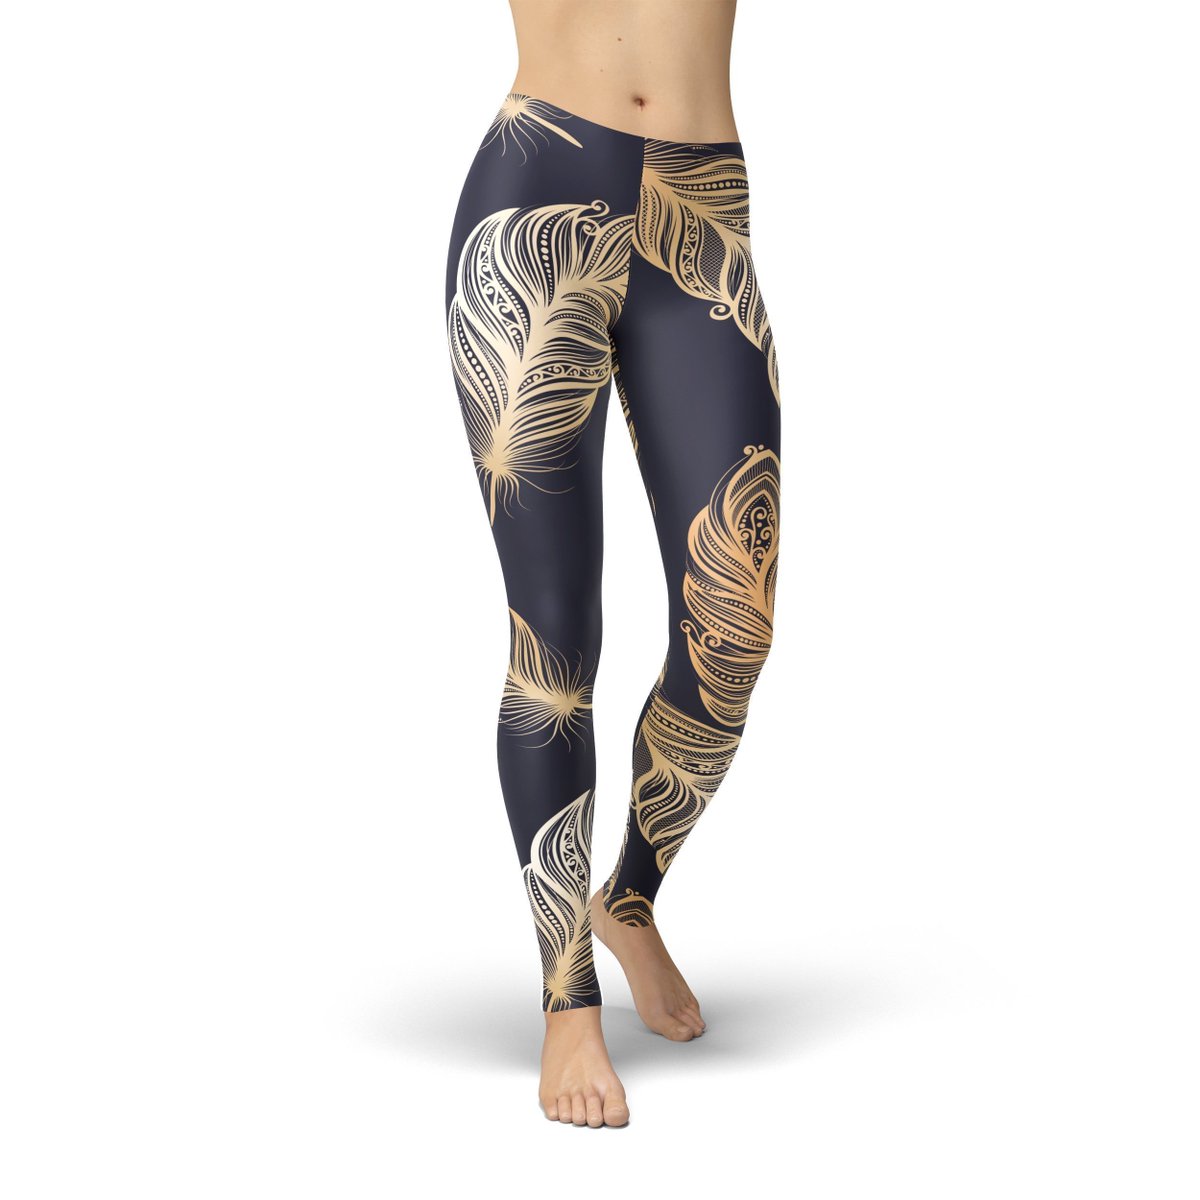 Jean Peacock Feathers Leggings https://t.co/oF89JHHcqu ALL-DAY COMFORT
Enter the room with elegance and grace by flaunting your feathers! The Handmade Women's Printed Peacock Feathers Leggings feature an all-over design on soft lycra fabric for lasting comfort.
BENEFITS
- H... https://t.co/GjTi4X2KUX